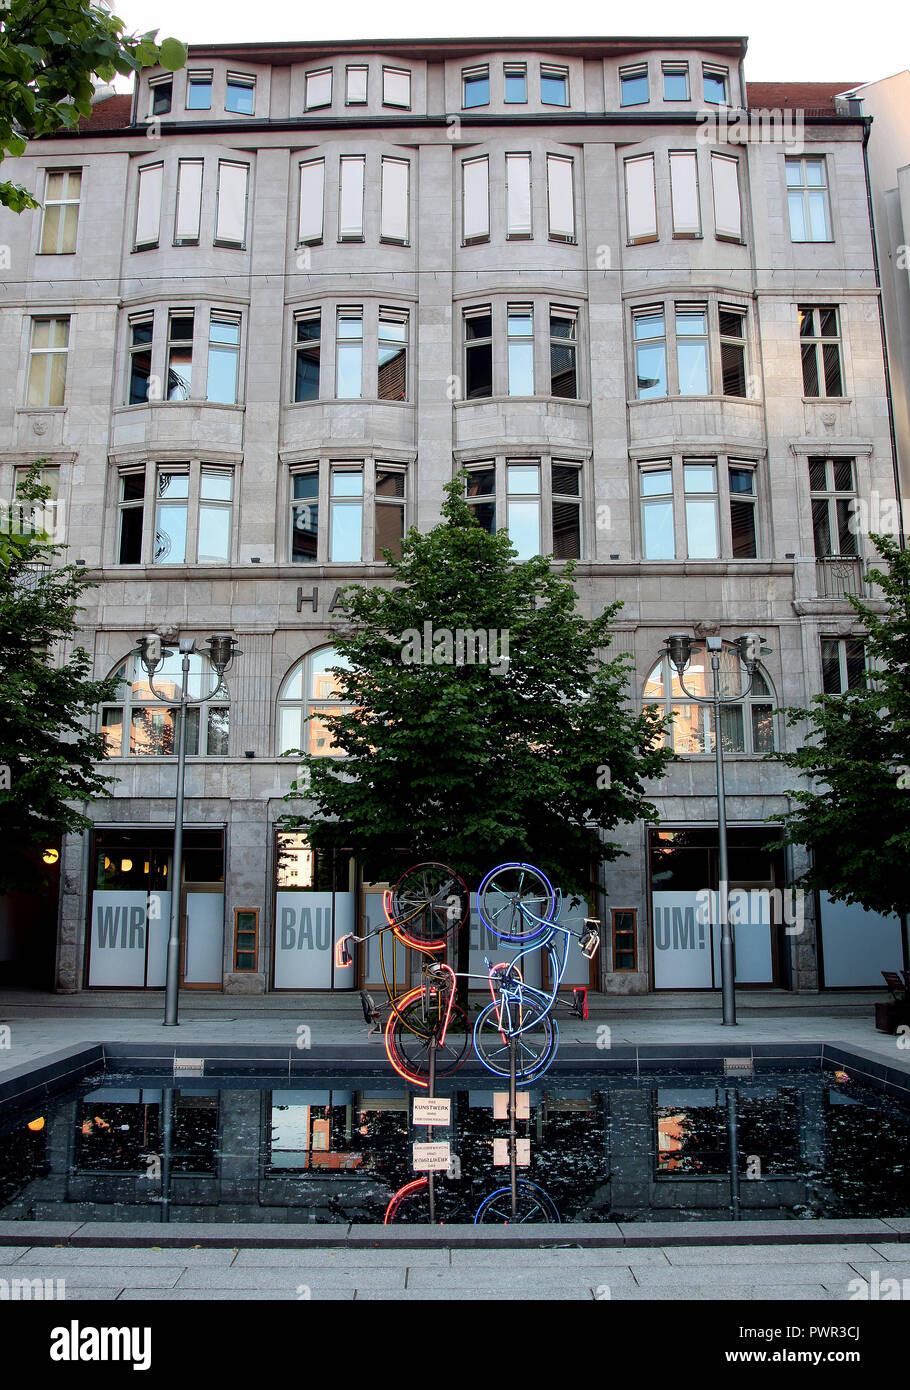 A neon bicycle art work, reflecting in a pond, in front of a classy building in Berlin. Stock Photo